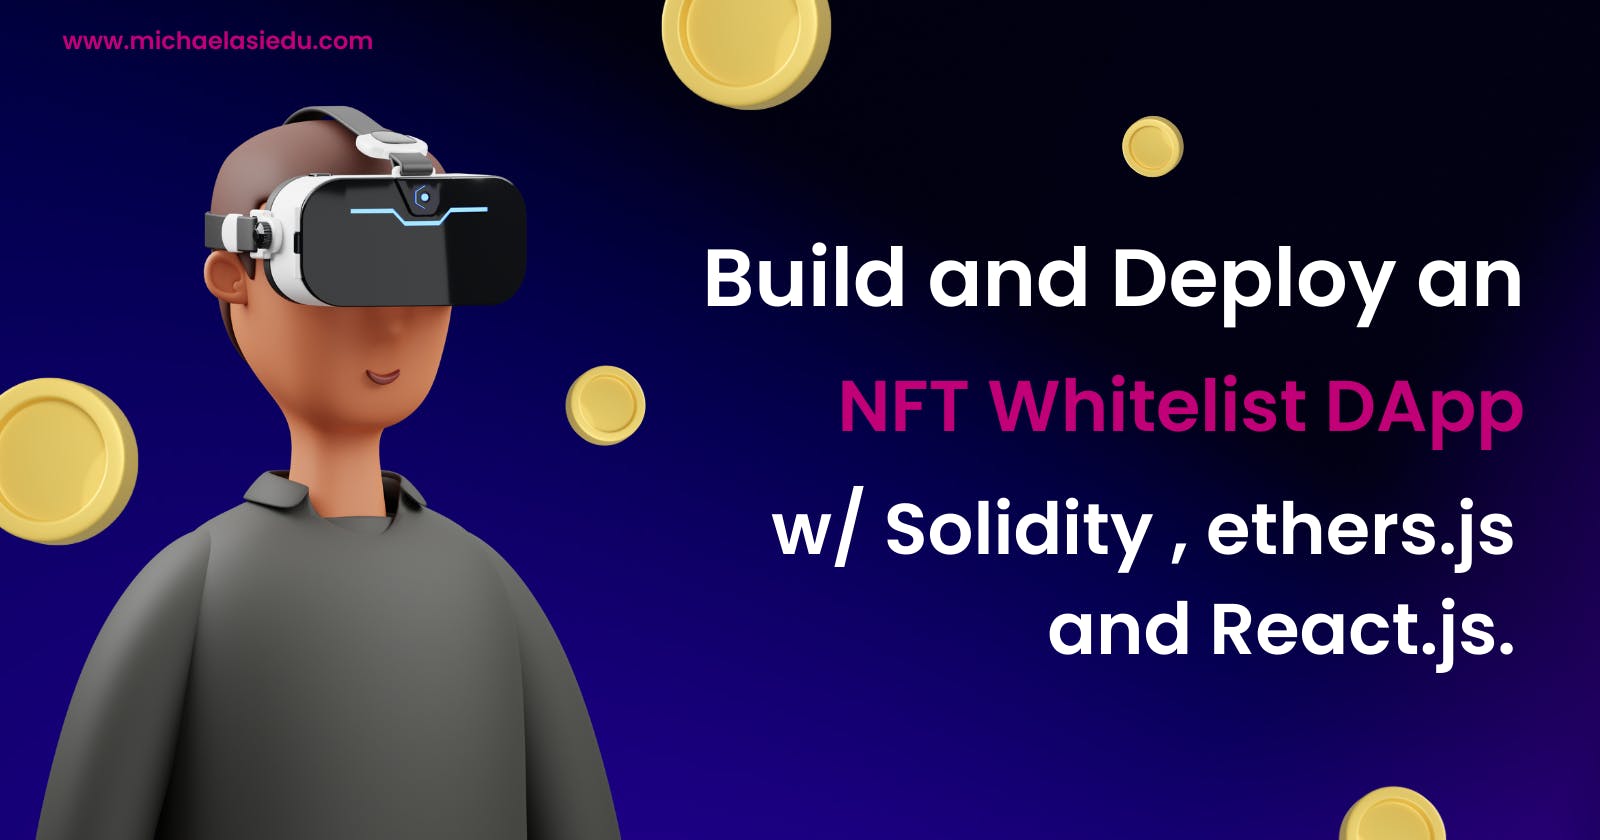 Build and deploy an NFT Whitelist App with React and Solidity | Step-by-Step Tutorial.